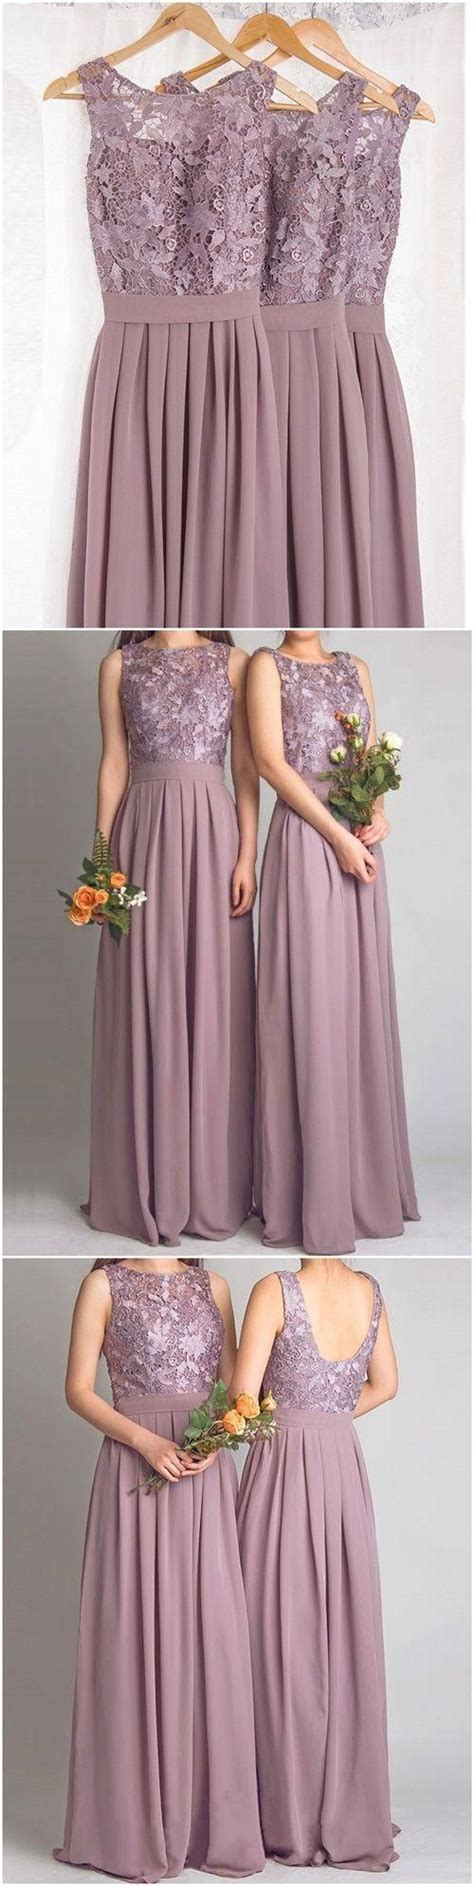 Dusty Mauve Bridesmaid Dresses For Wedding With Applique Pleat Jewel